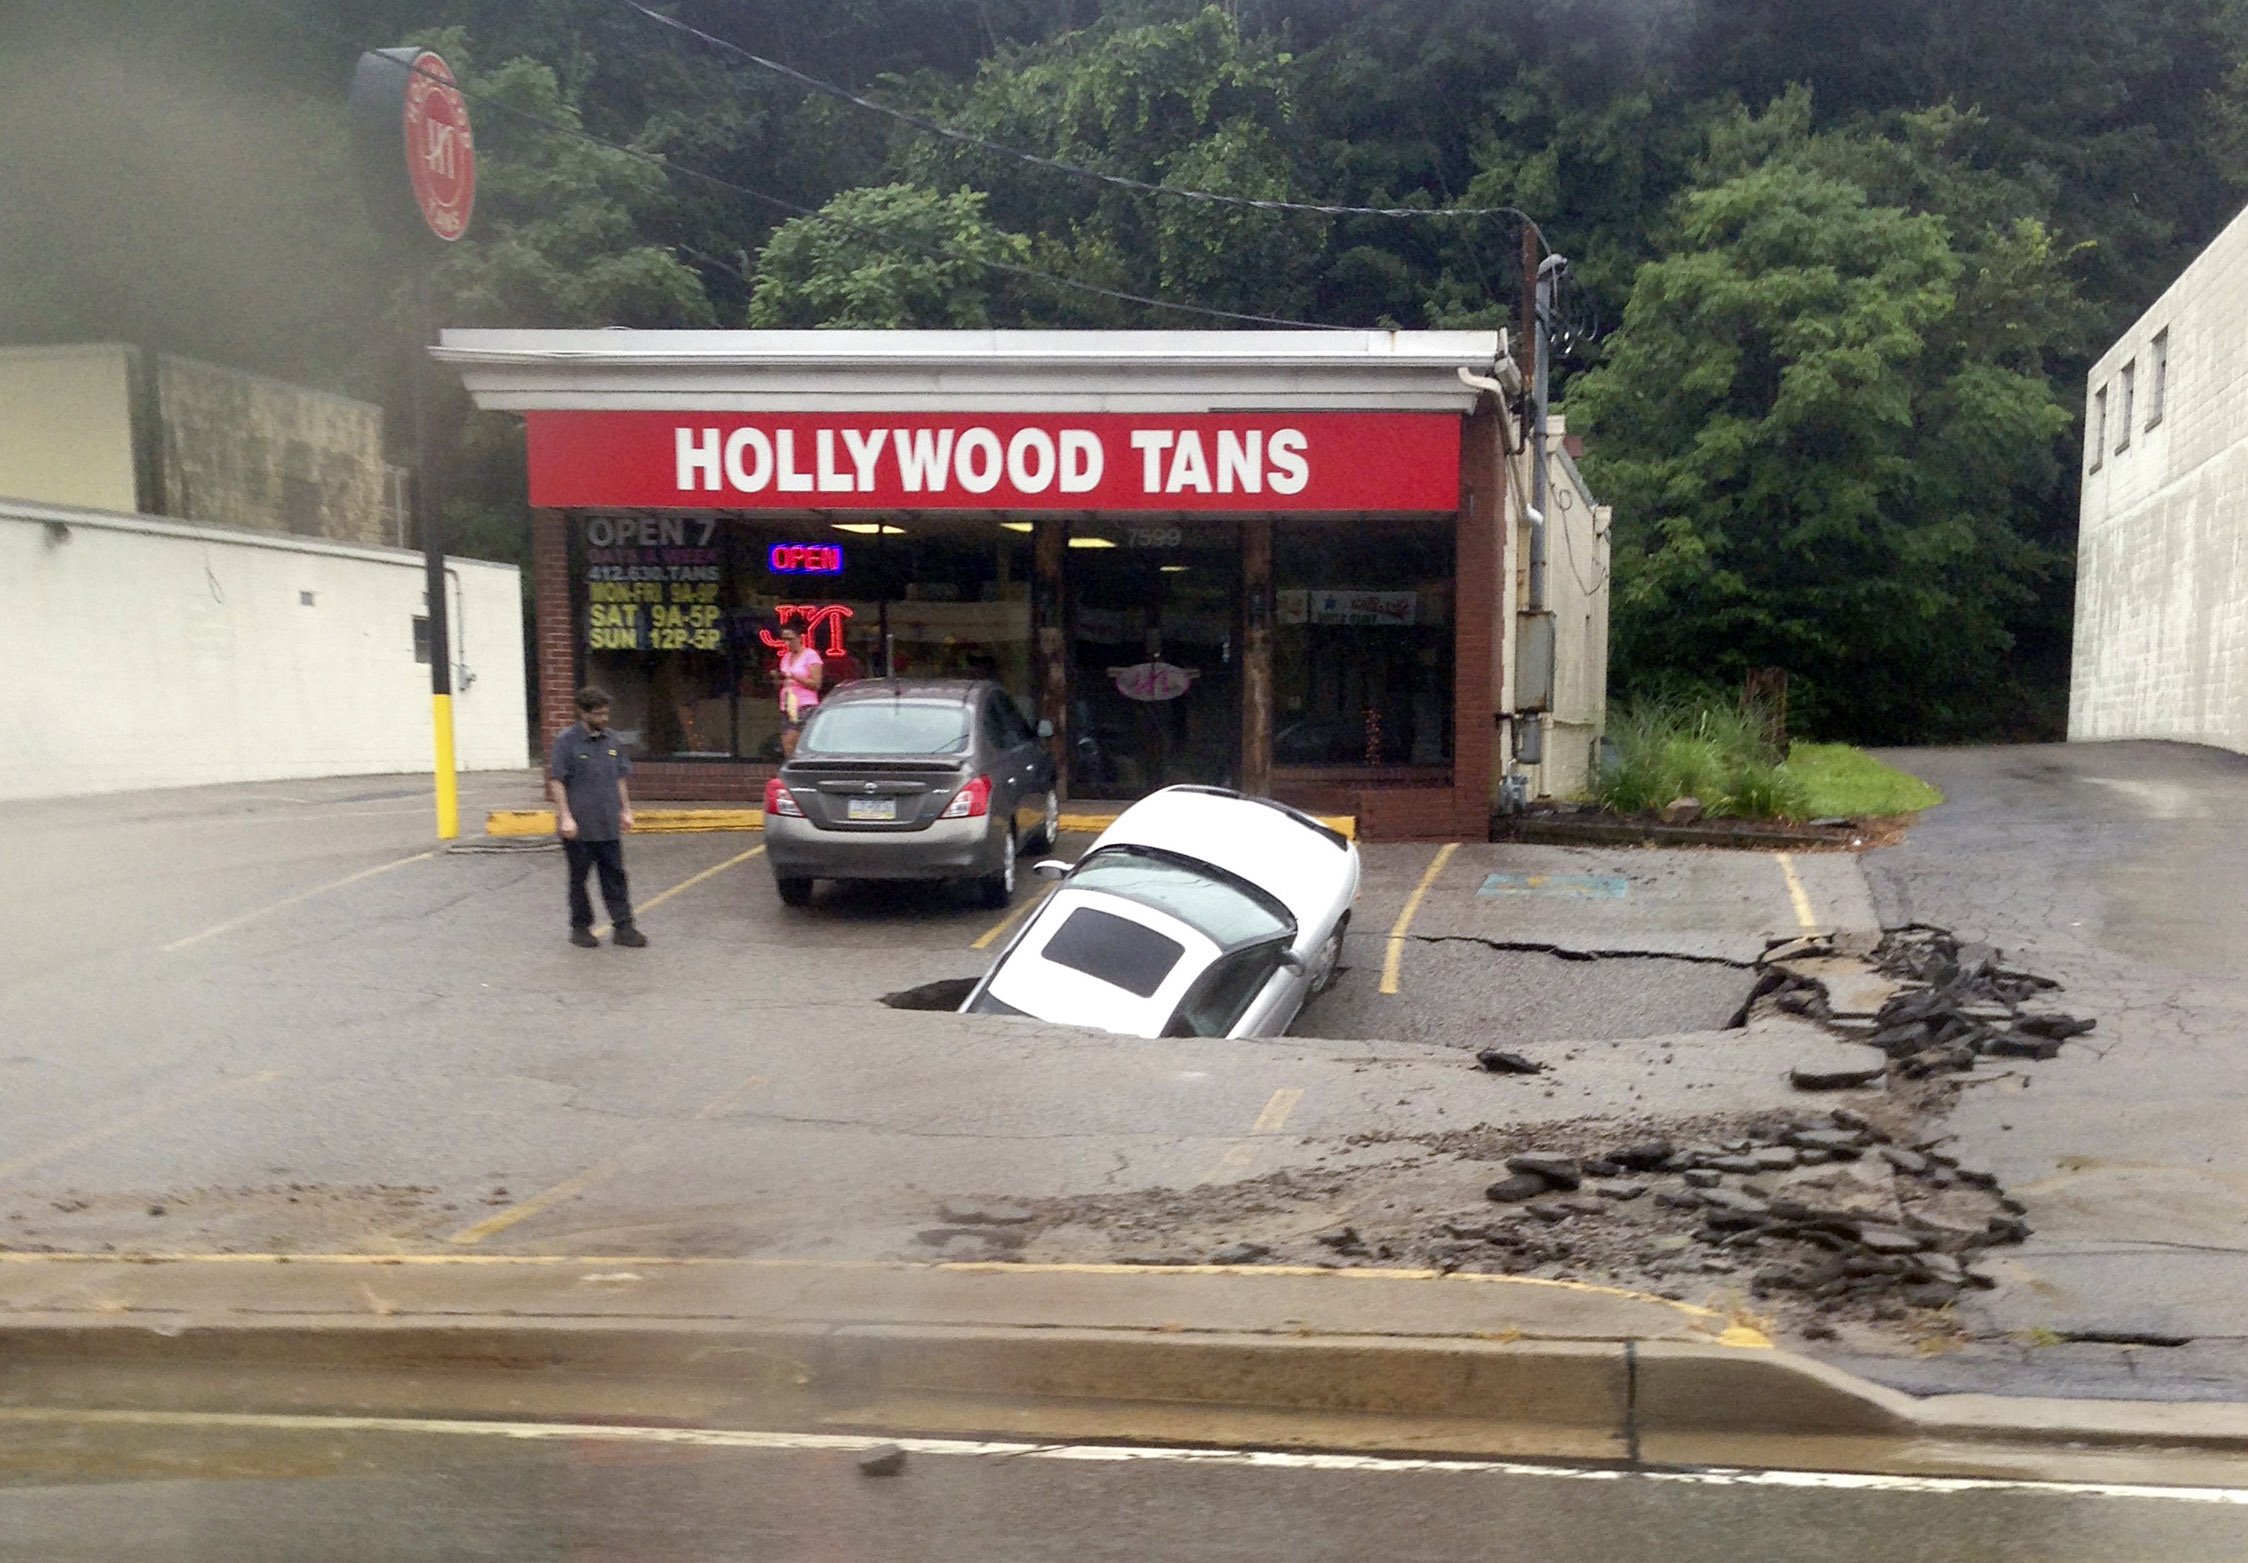 A man looks at a car as it falls into a sinkhole on McKnight Road in Ross Township of Pittsburgh on Aug. 12, 2014.